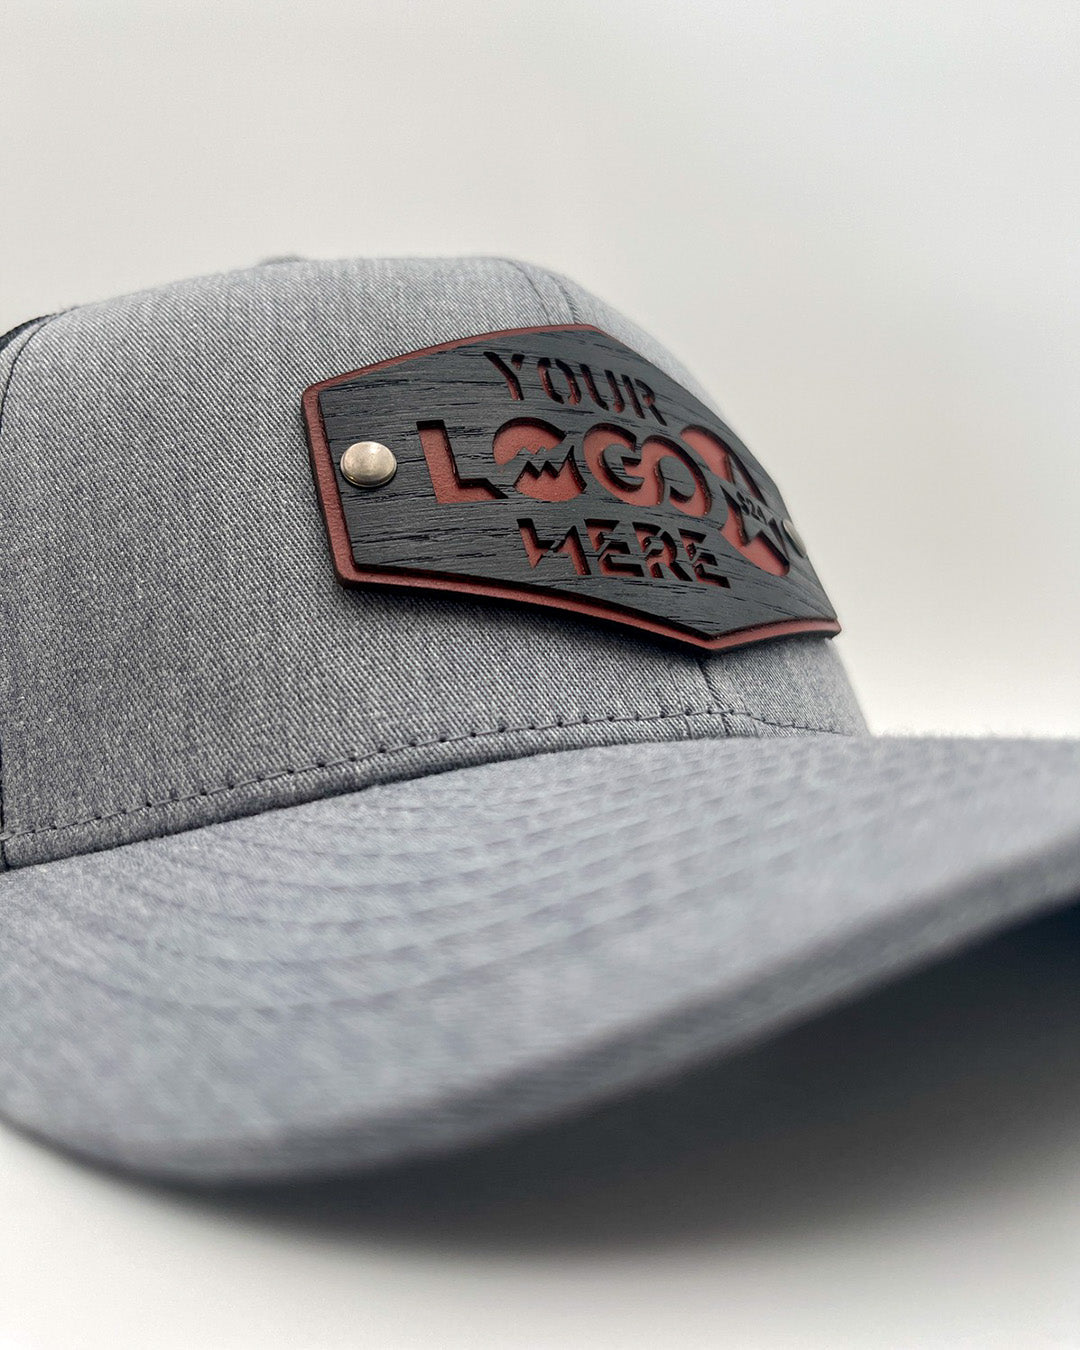 Custom Embroidered Patches on Trucker Hats